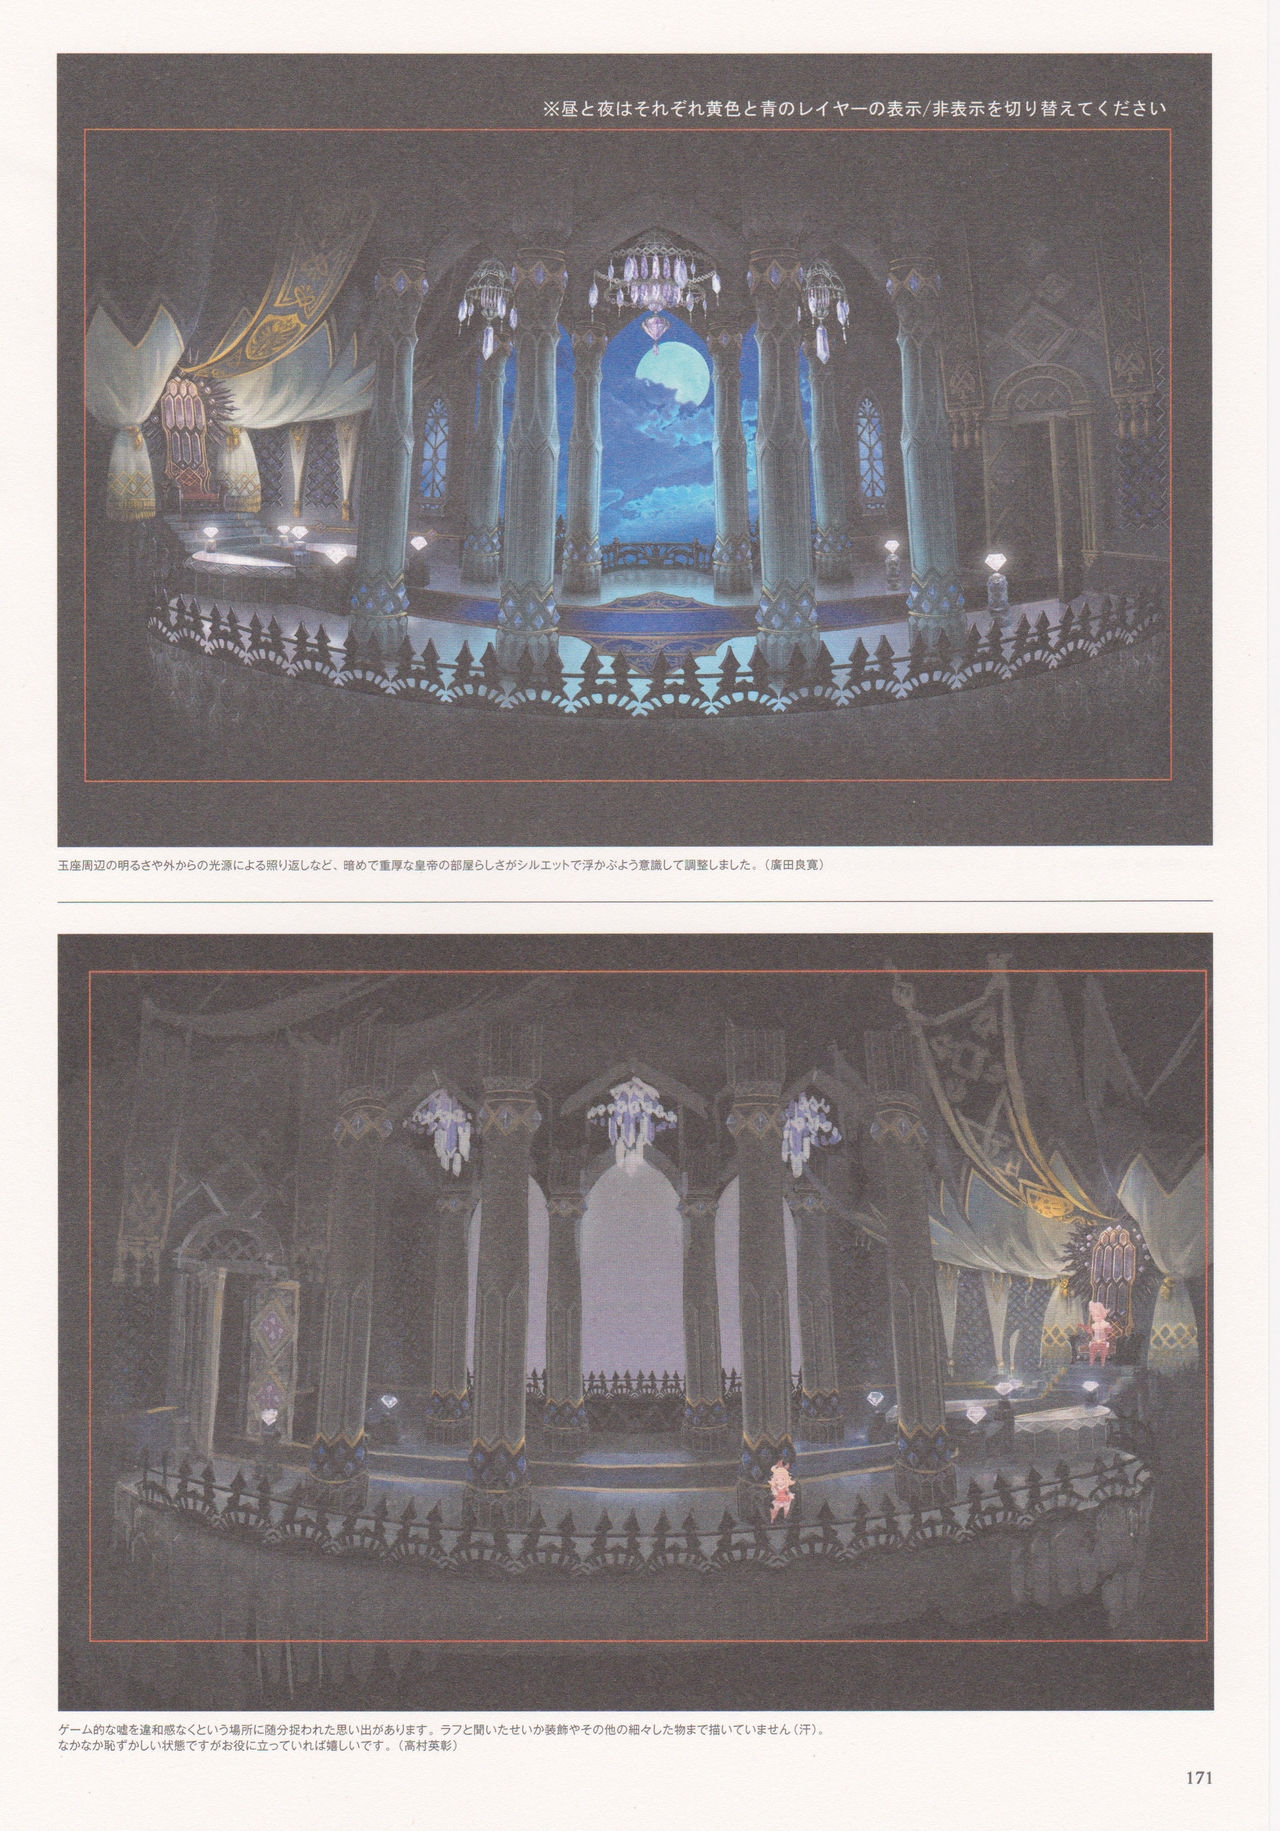 Bravely Second - End Layer - Design Works THE ART OF BRAVELY 2013-2015 171